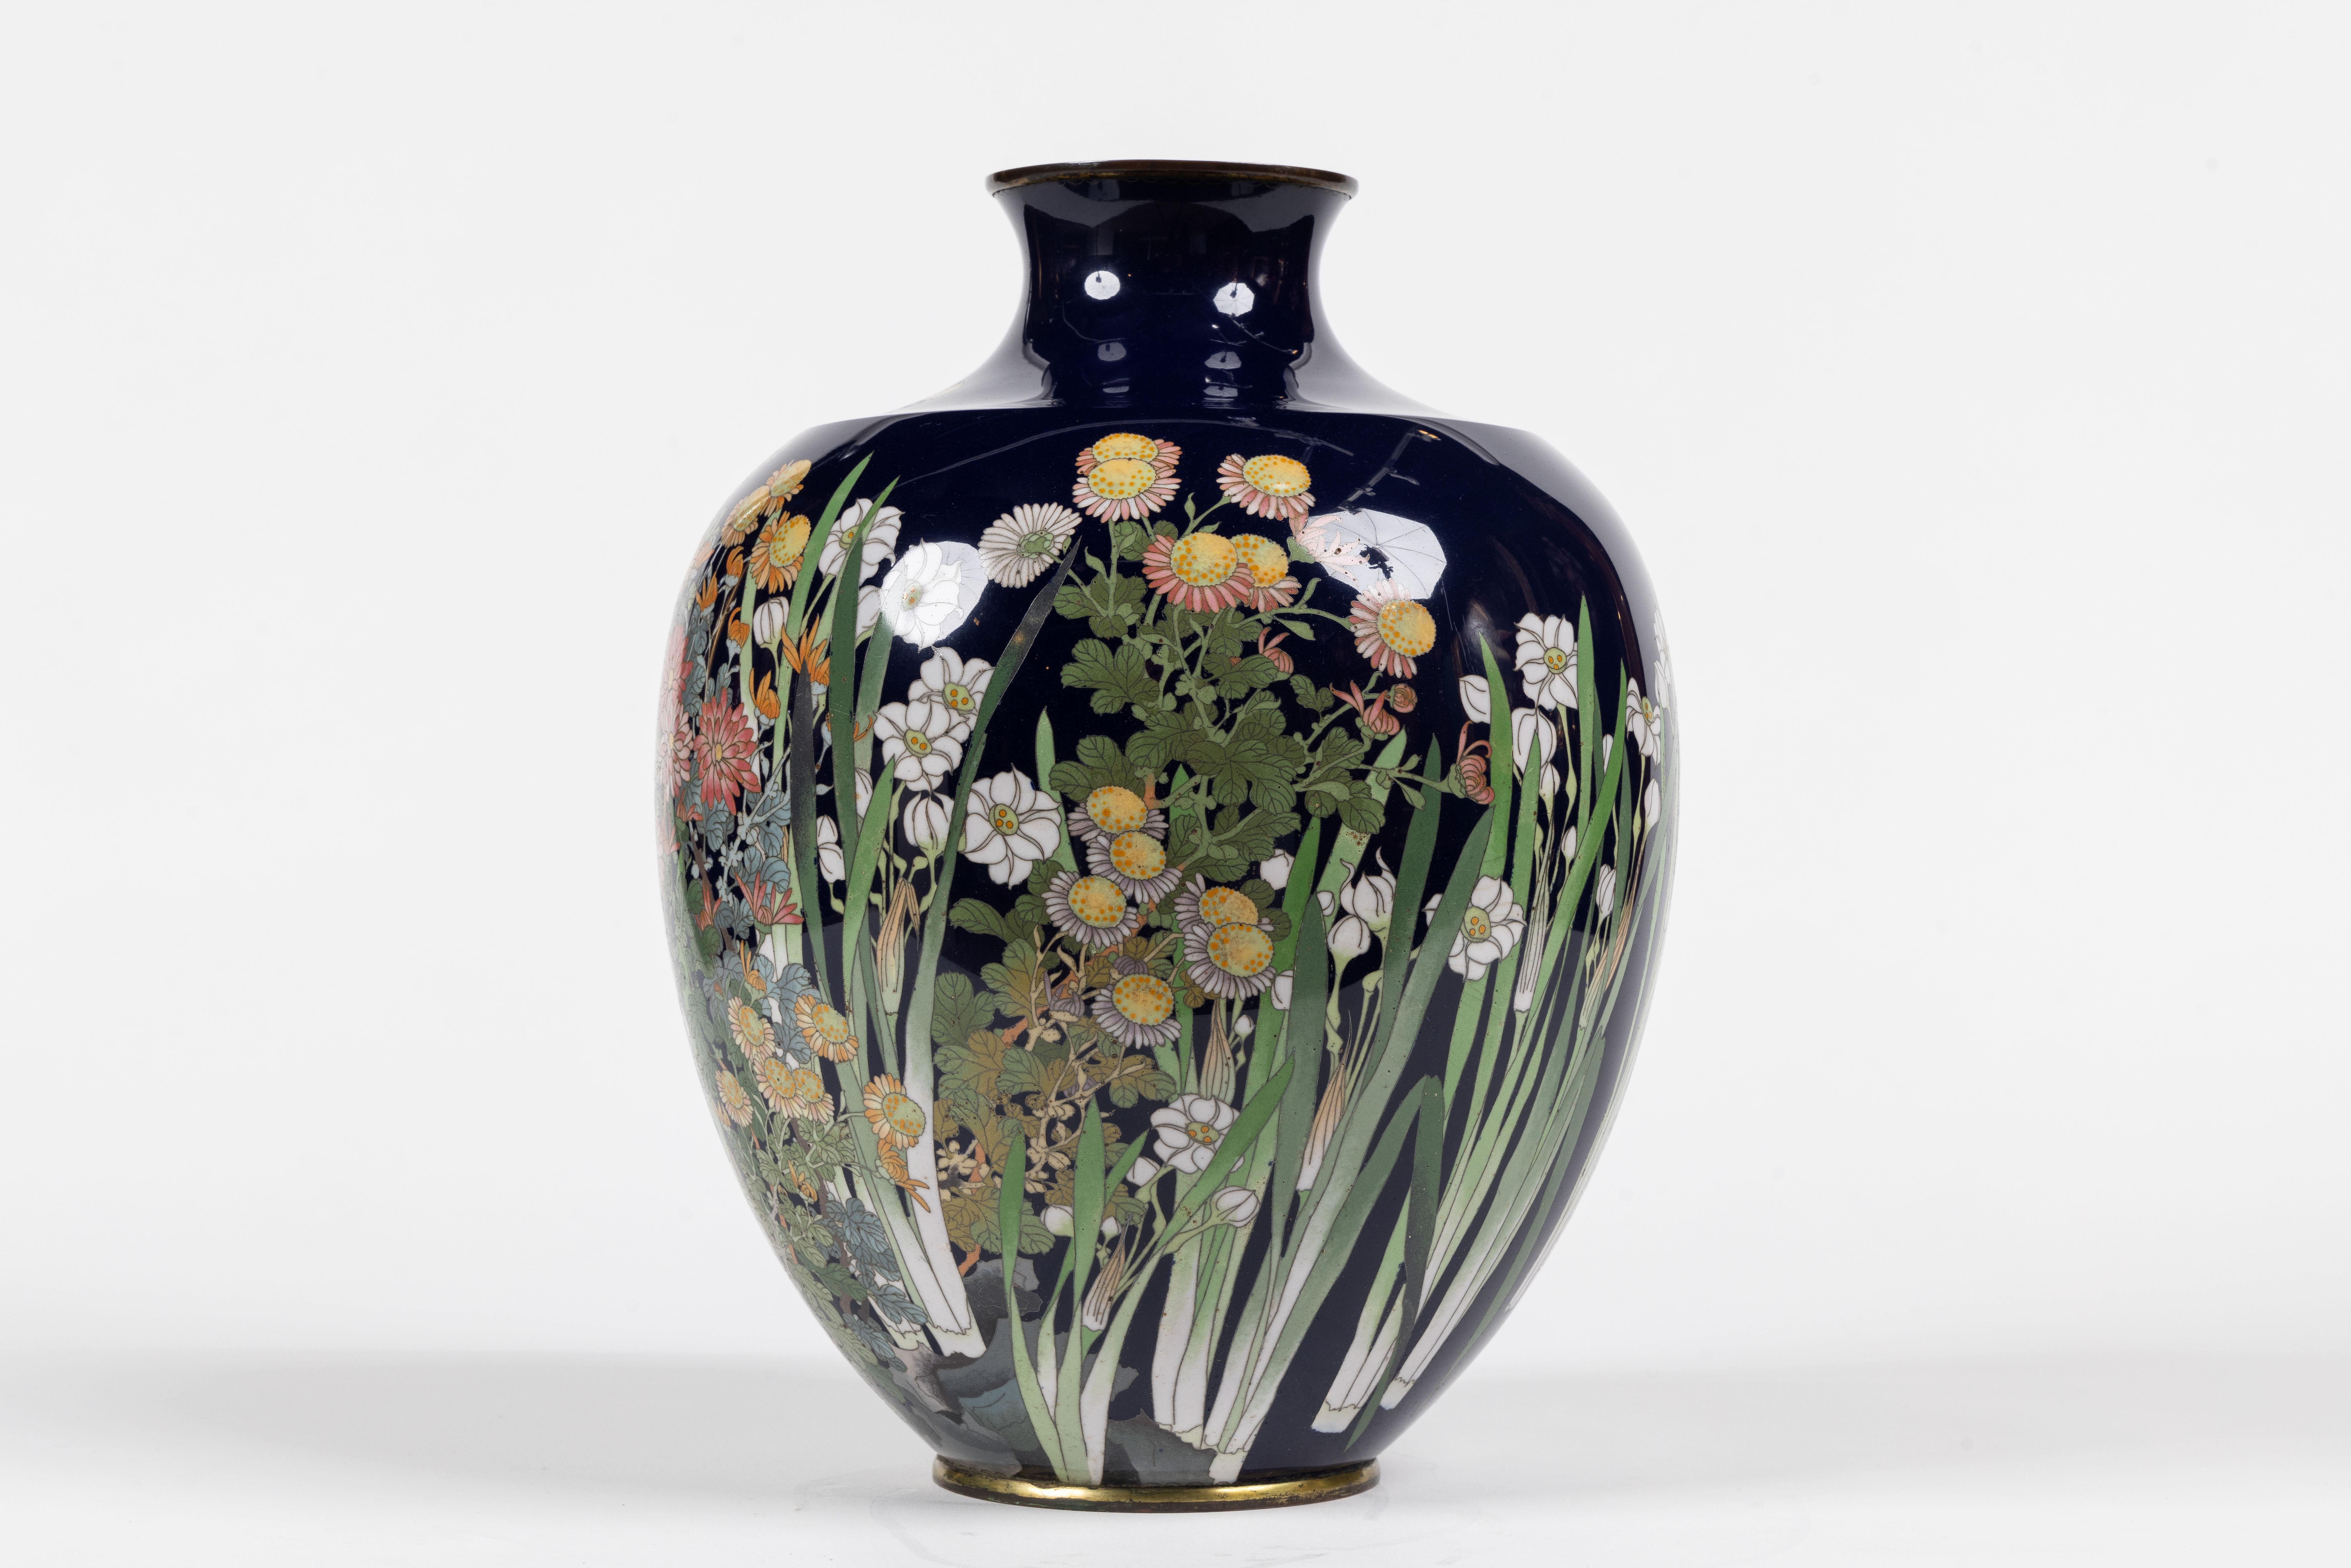 Presenting a truly remarkable piece, this large exquisite quality cobalt ground Meiji Period Japanese cloisonne Enamel Bud Vase. This magnificent artwork embodies the timeless beauty and impeccable craftsmanship of the Meiji era, showcasing the